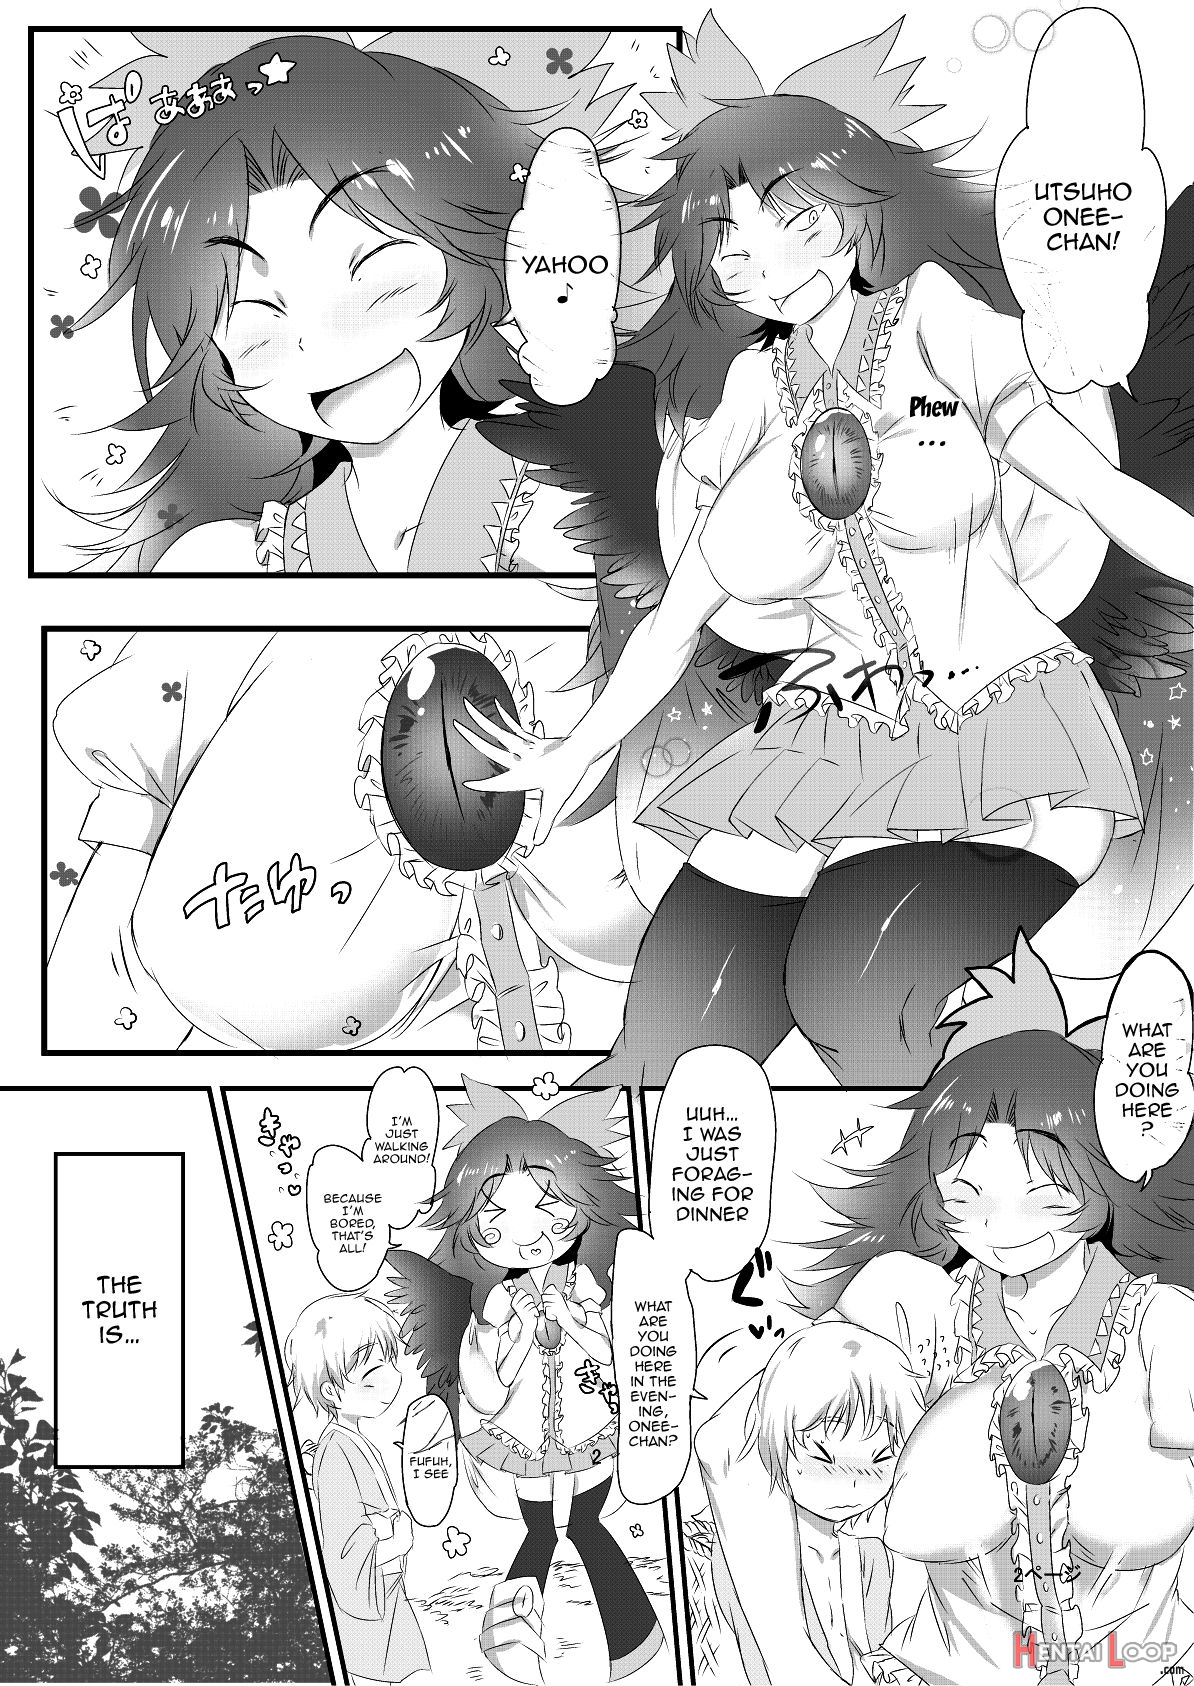 Together With A Futa Youkai page 3